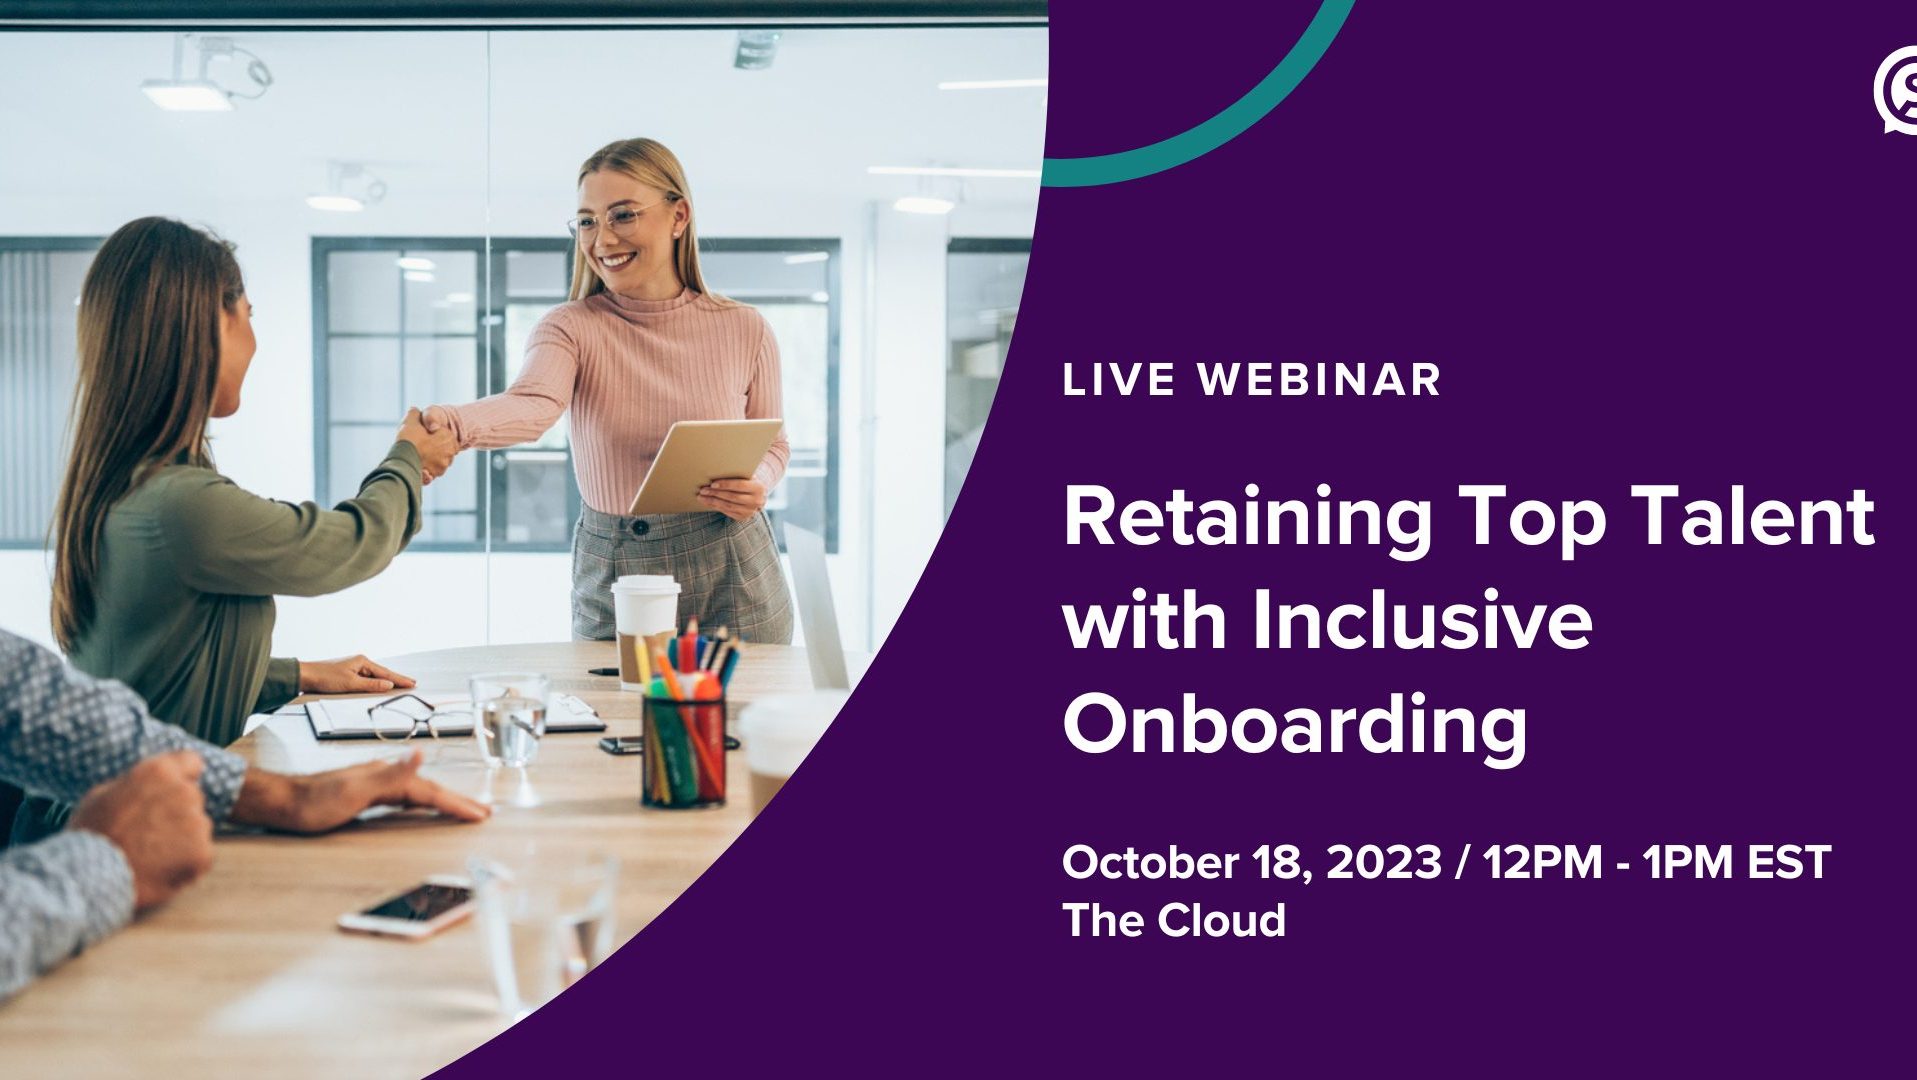 Webinar: Retaining Top Talent with Inclusive Onboarding